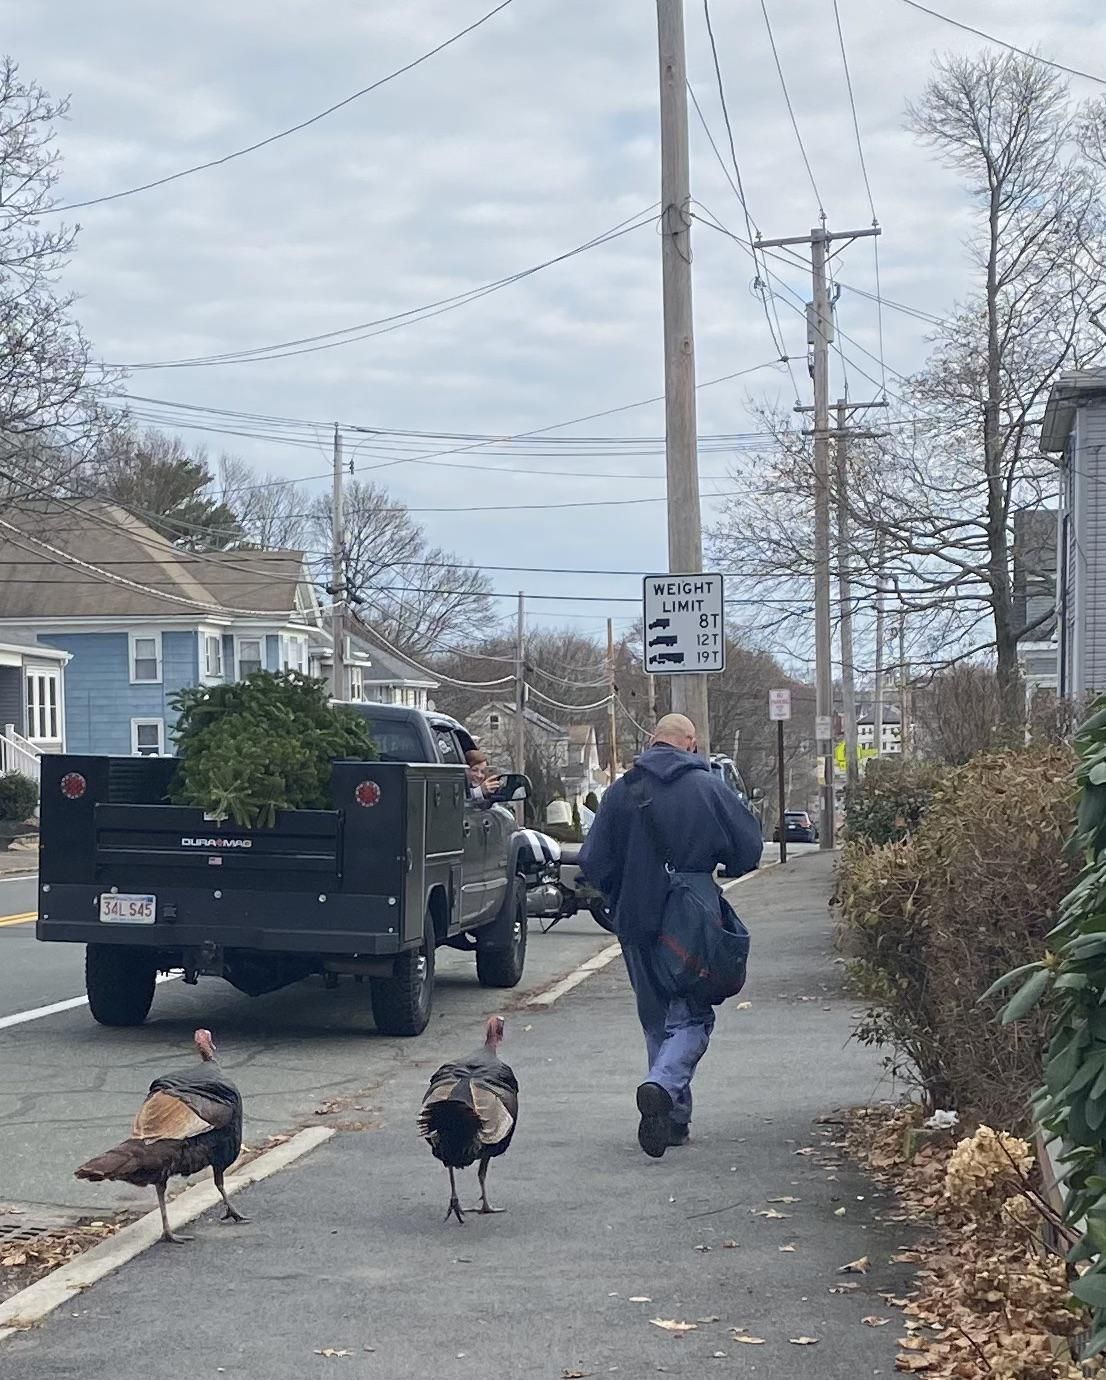 This mailman spent the day being followed by Turkeys